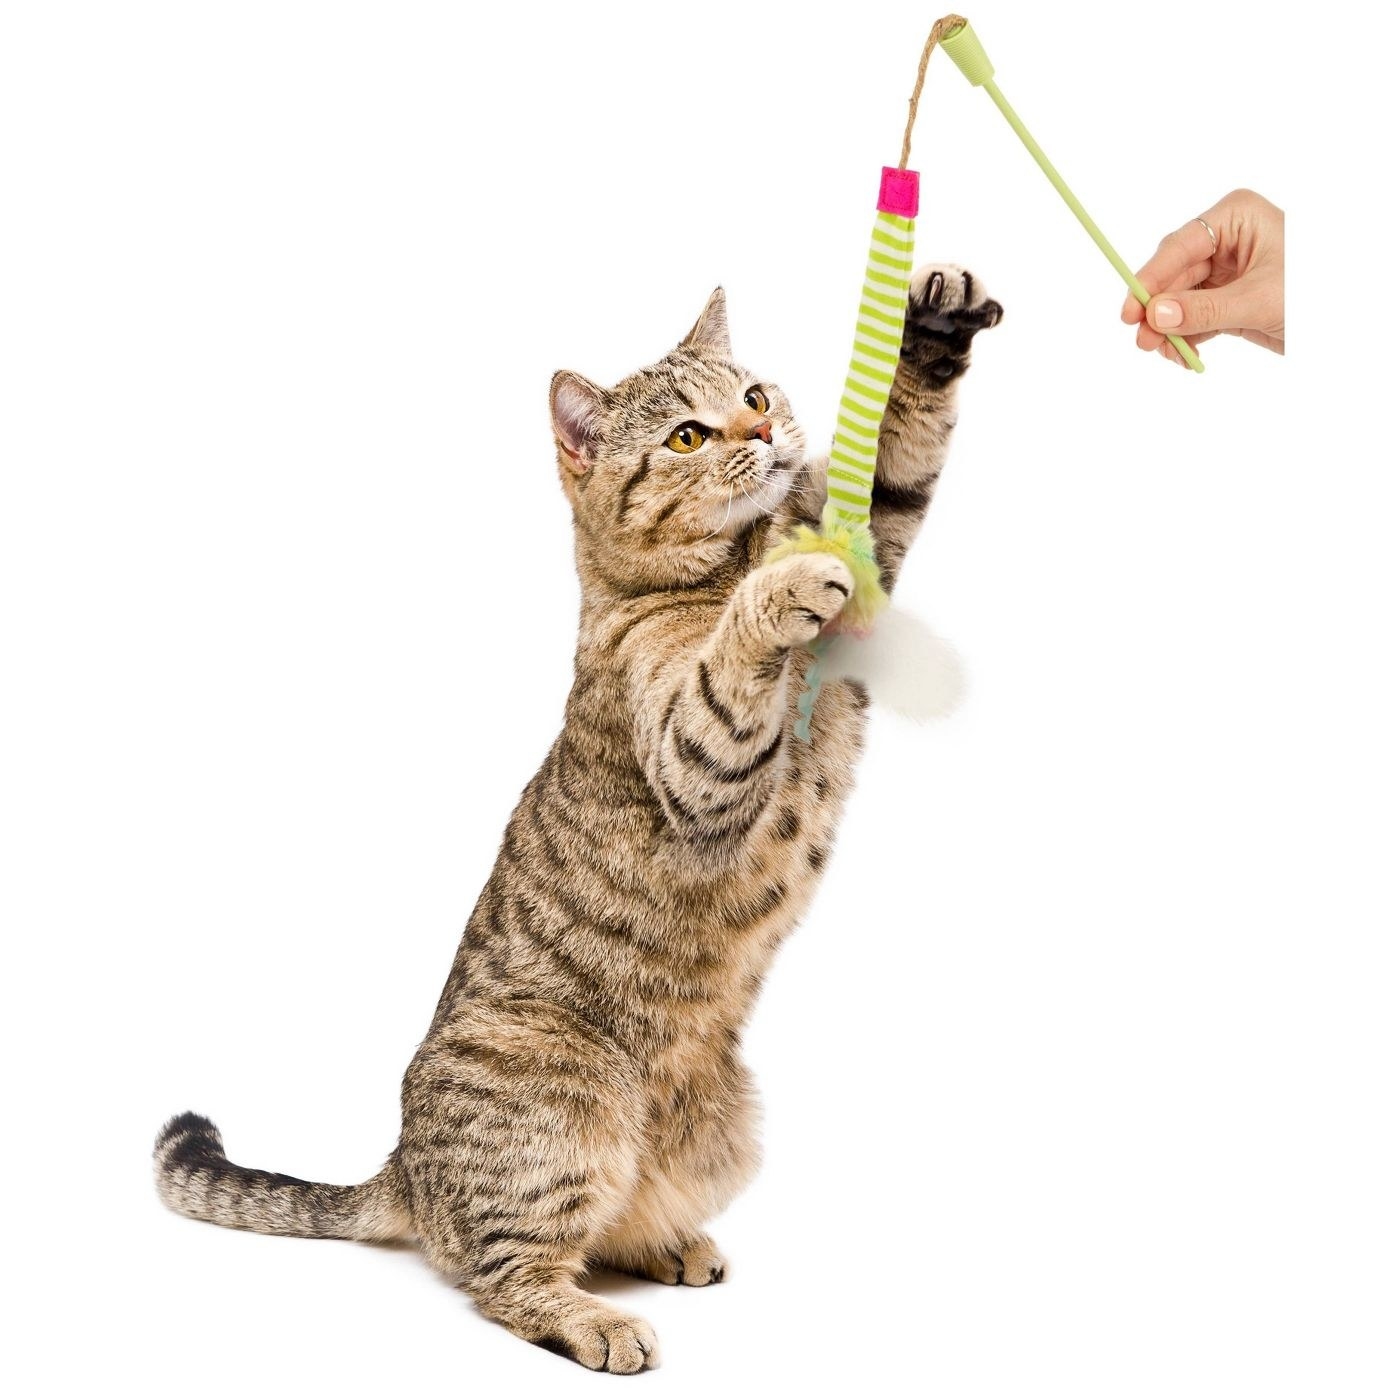 Cat playing with wand toy